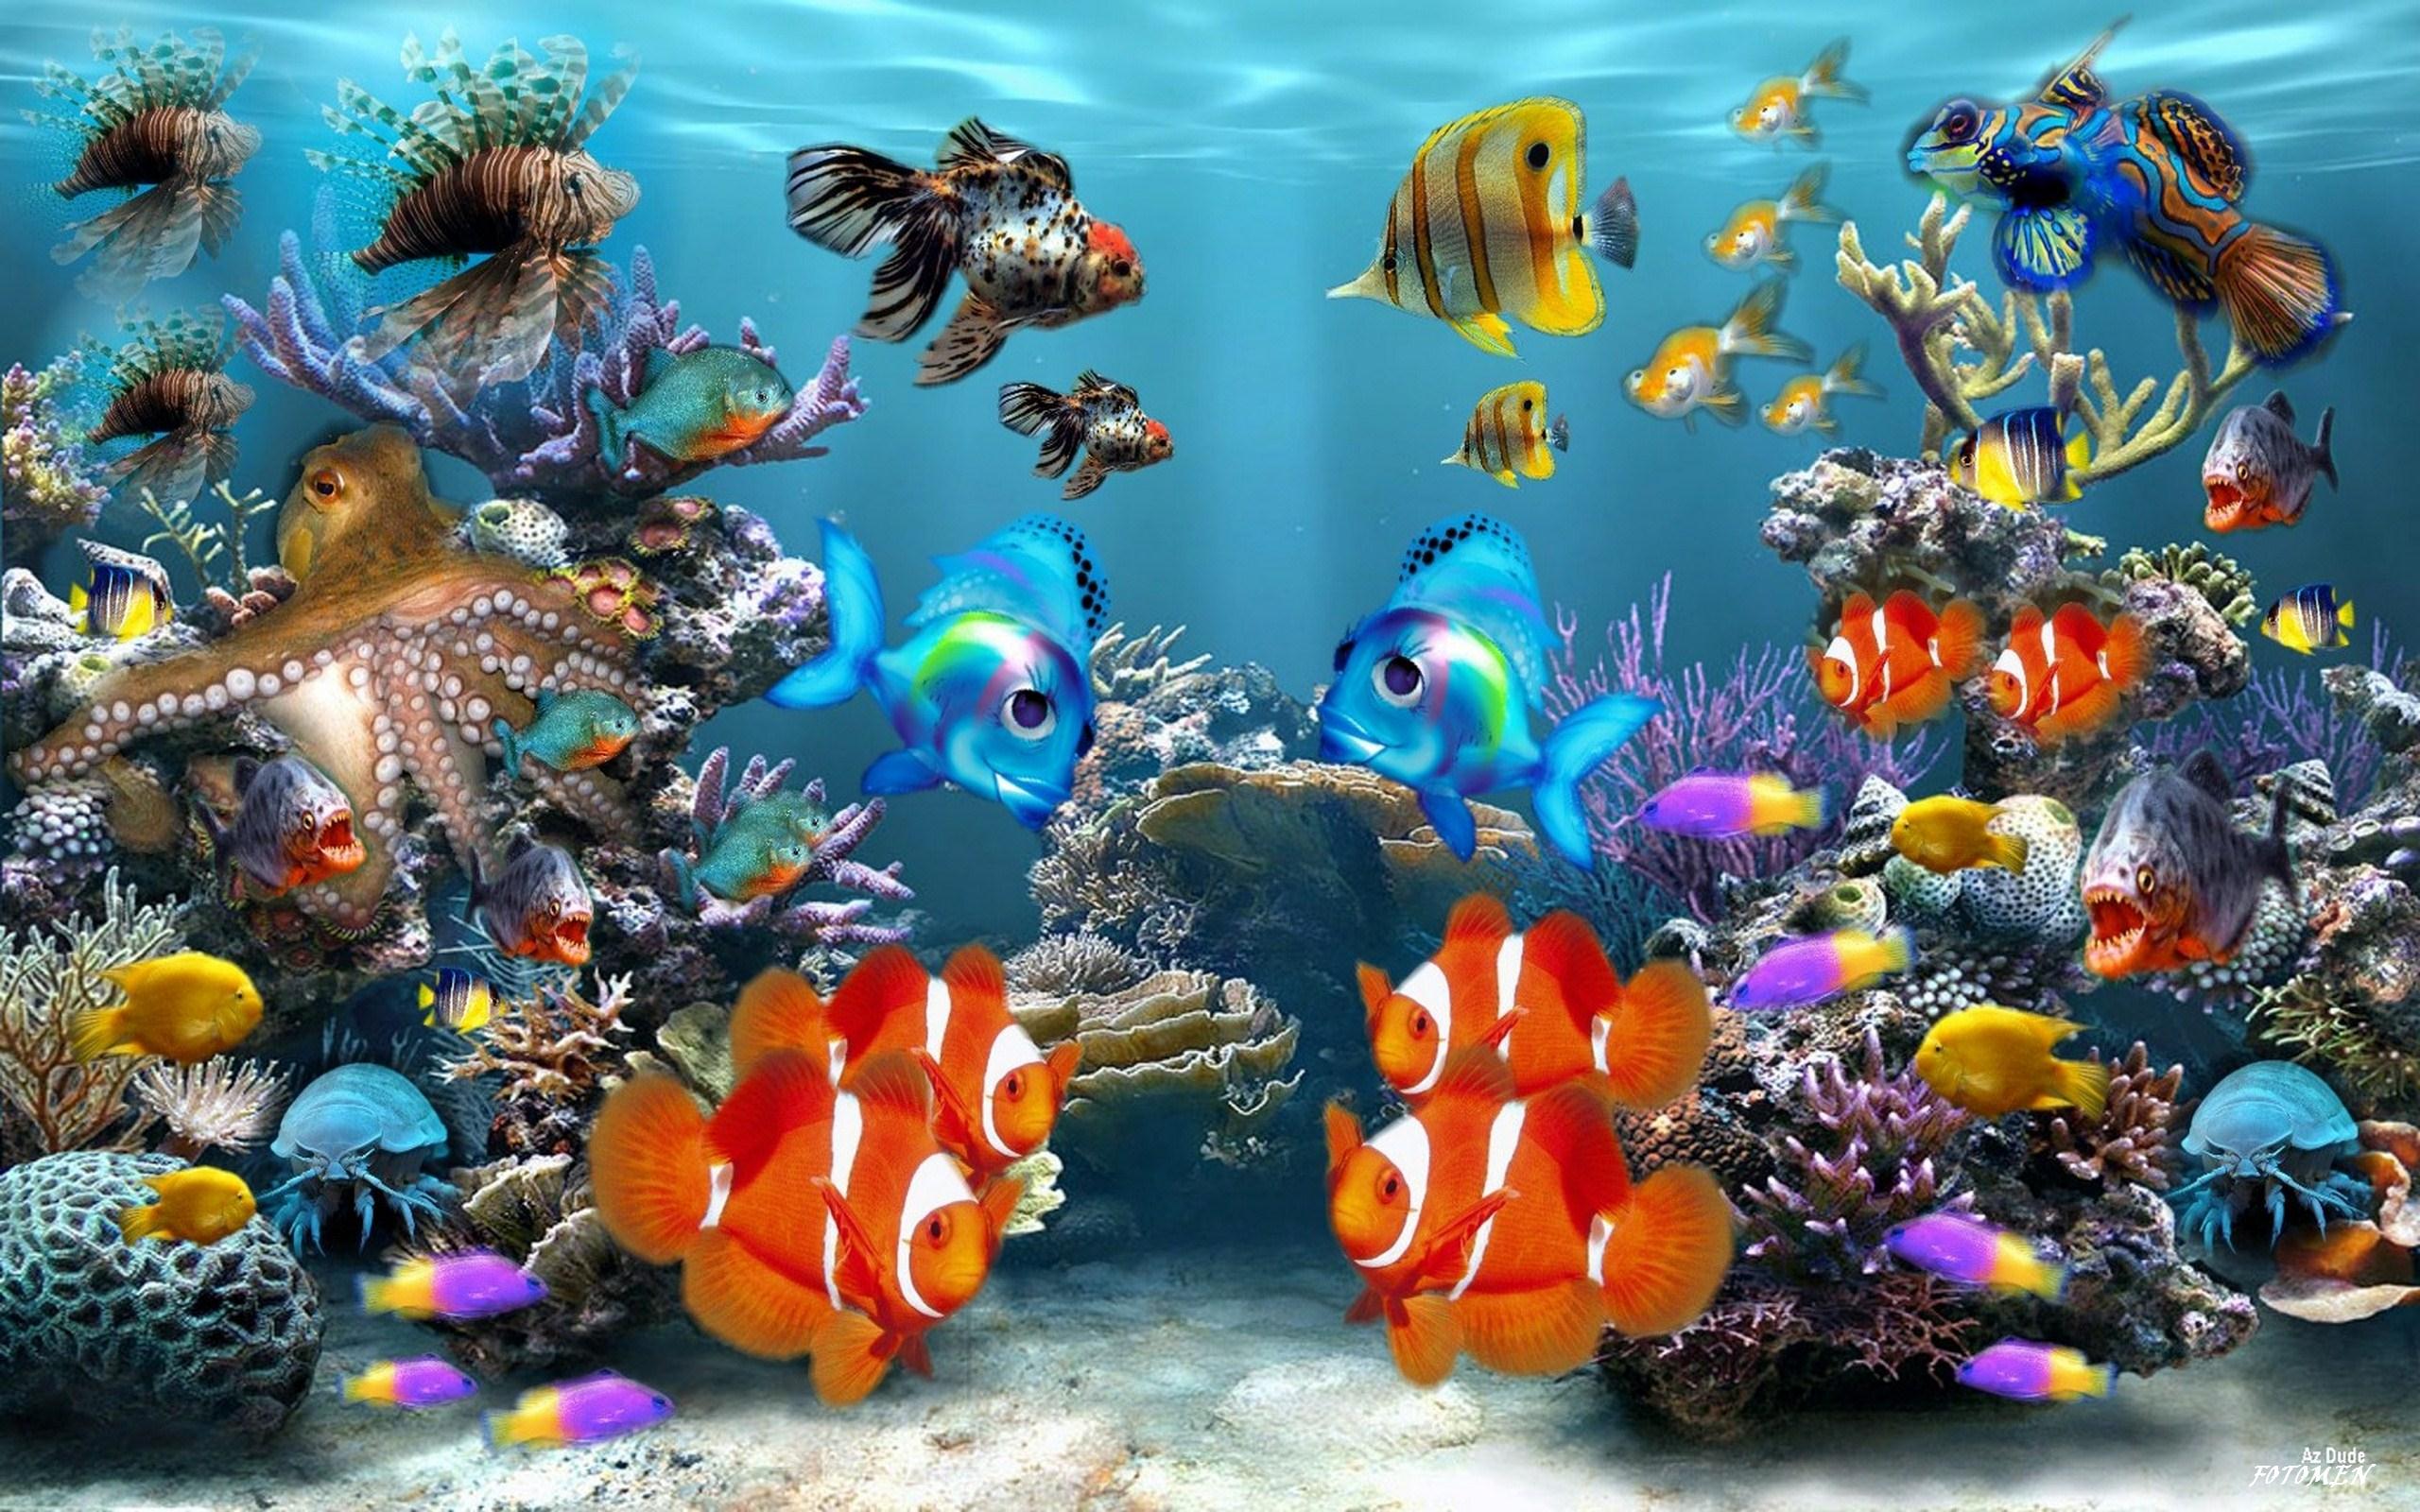 3d Fish Wallpaper Pictures Of Sea Most Beautiful Islamic